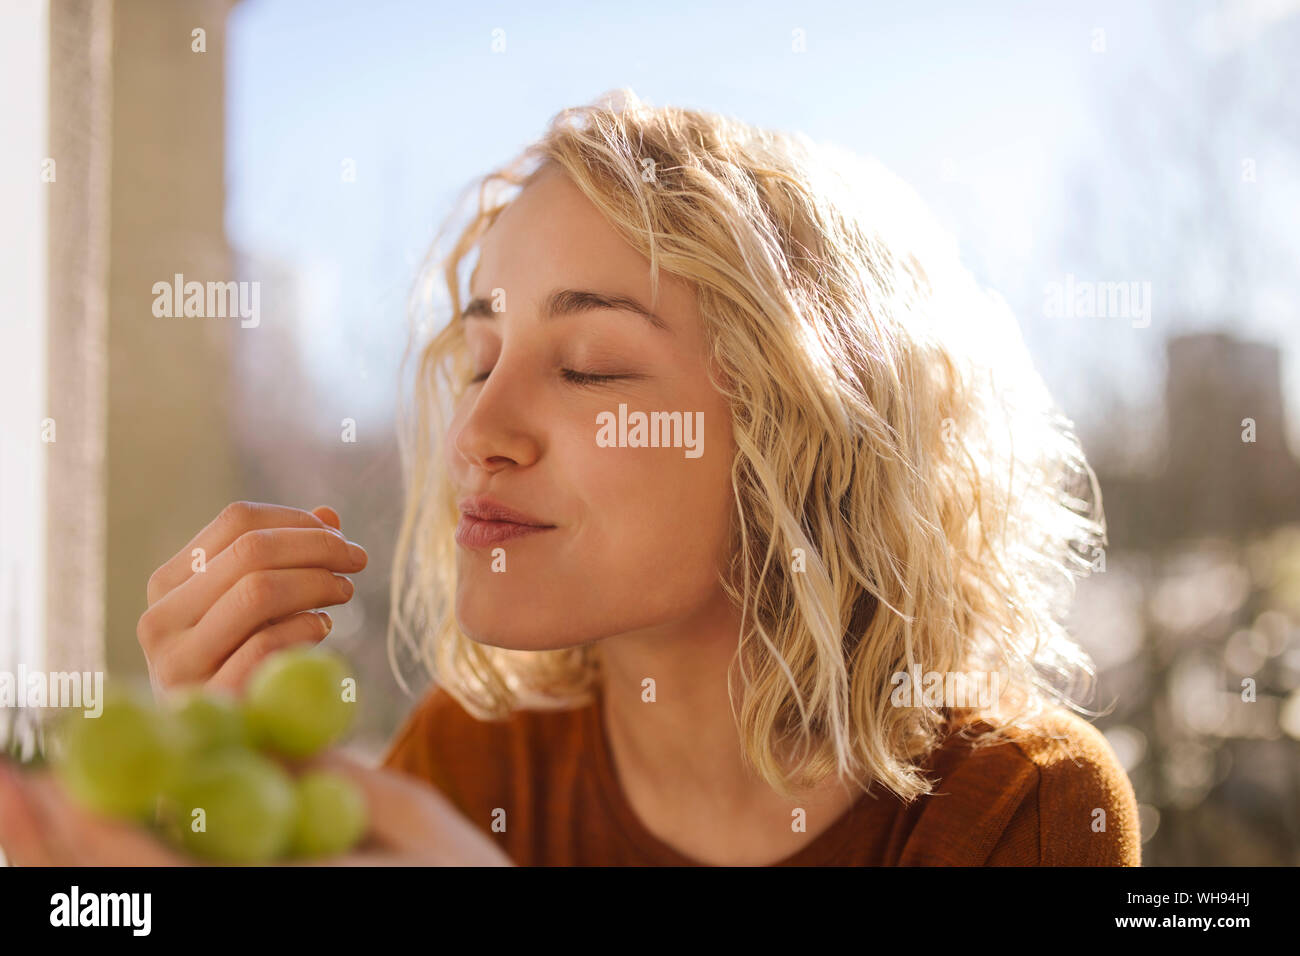 Portrait of blond young woman eating green grapes Stock Photo